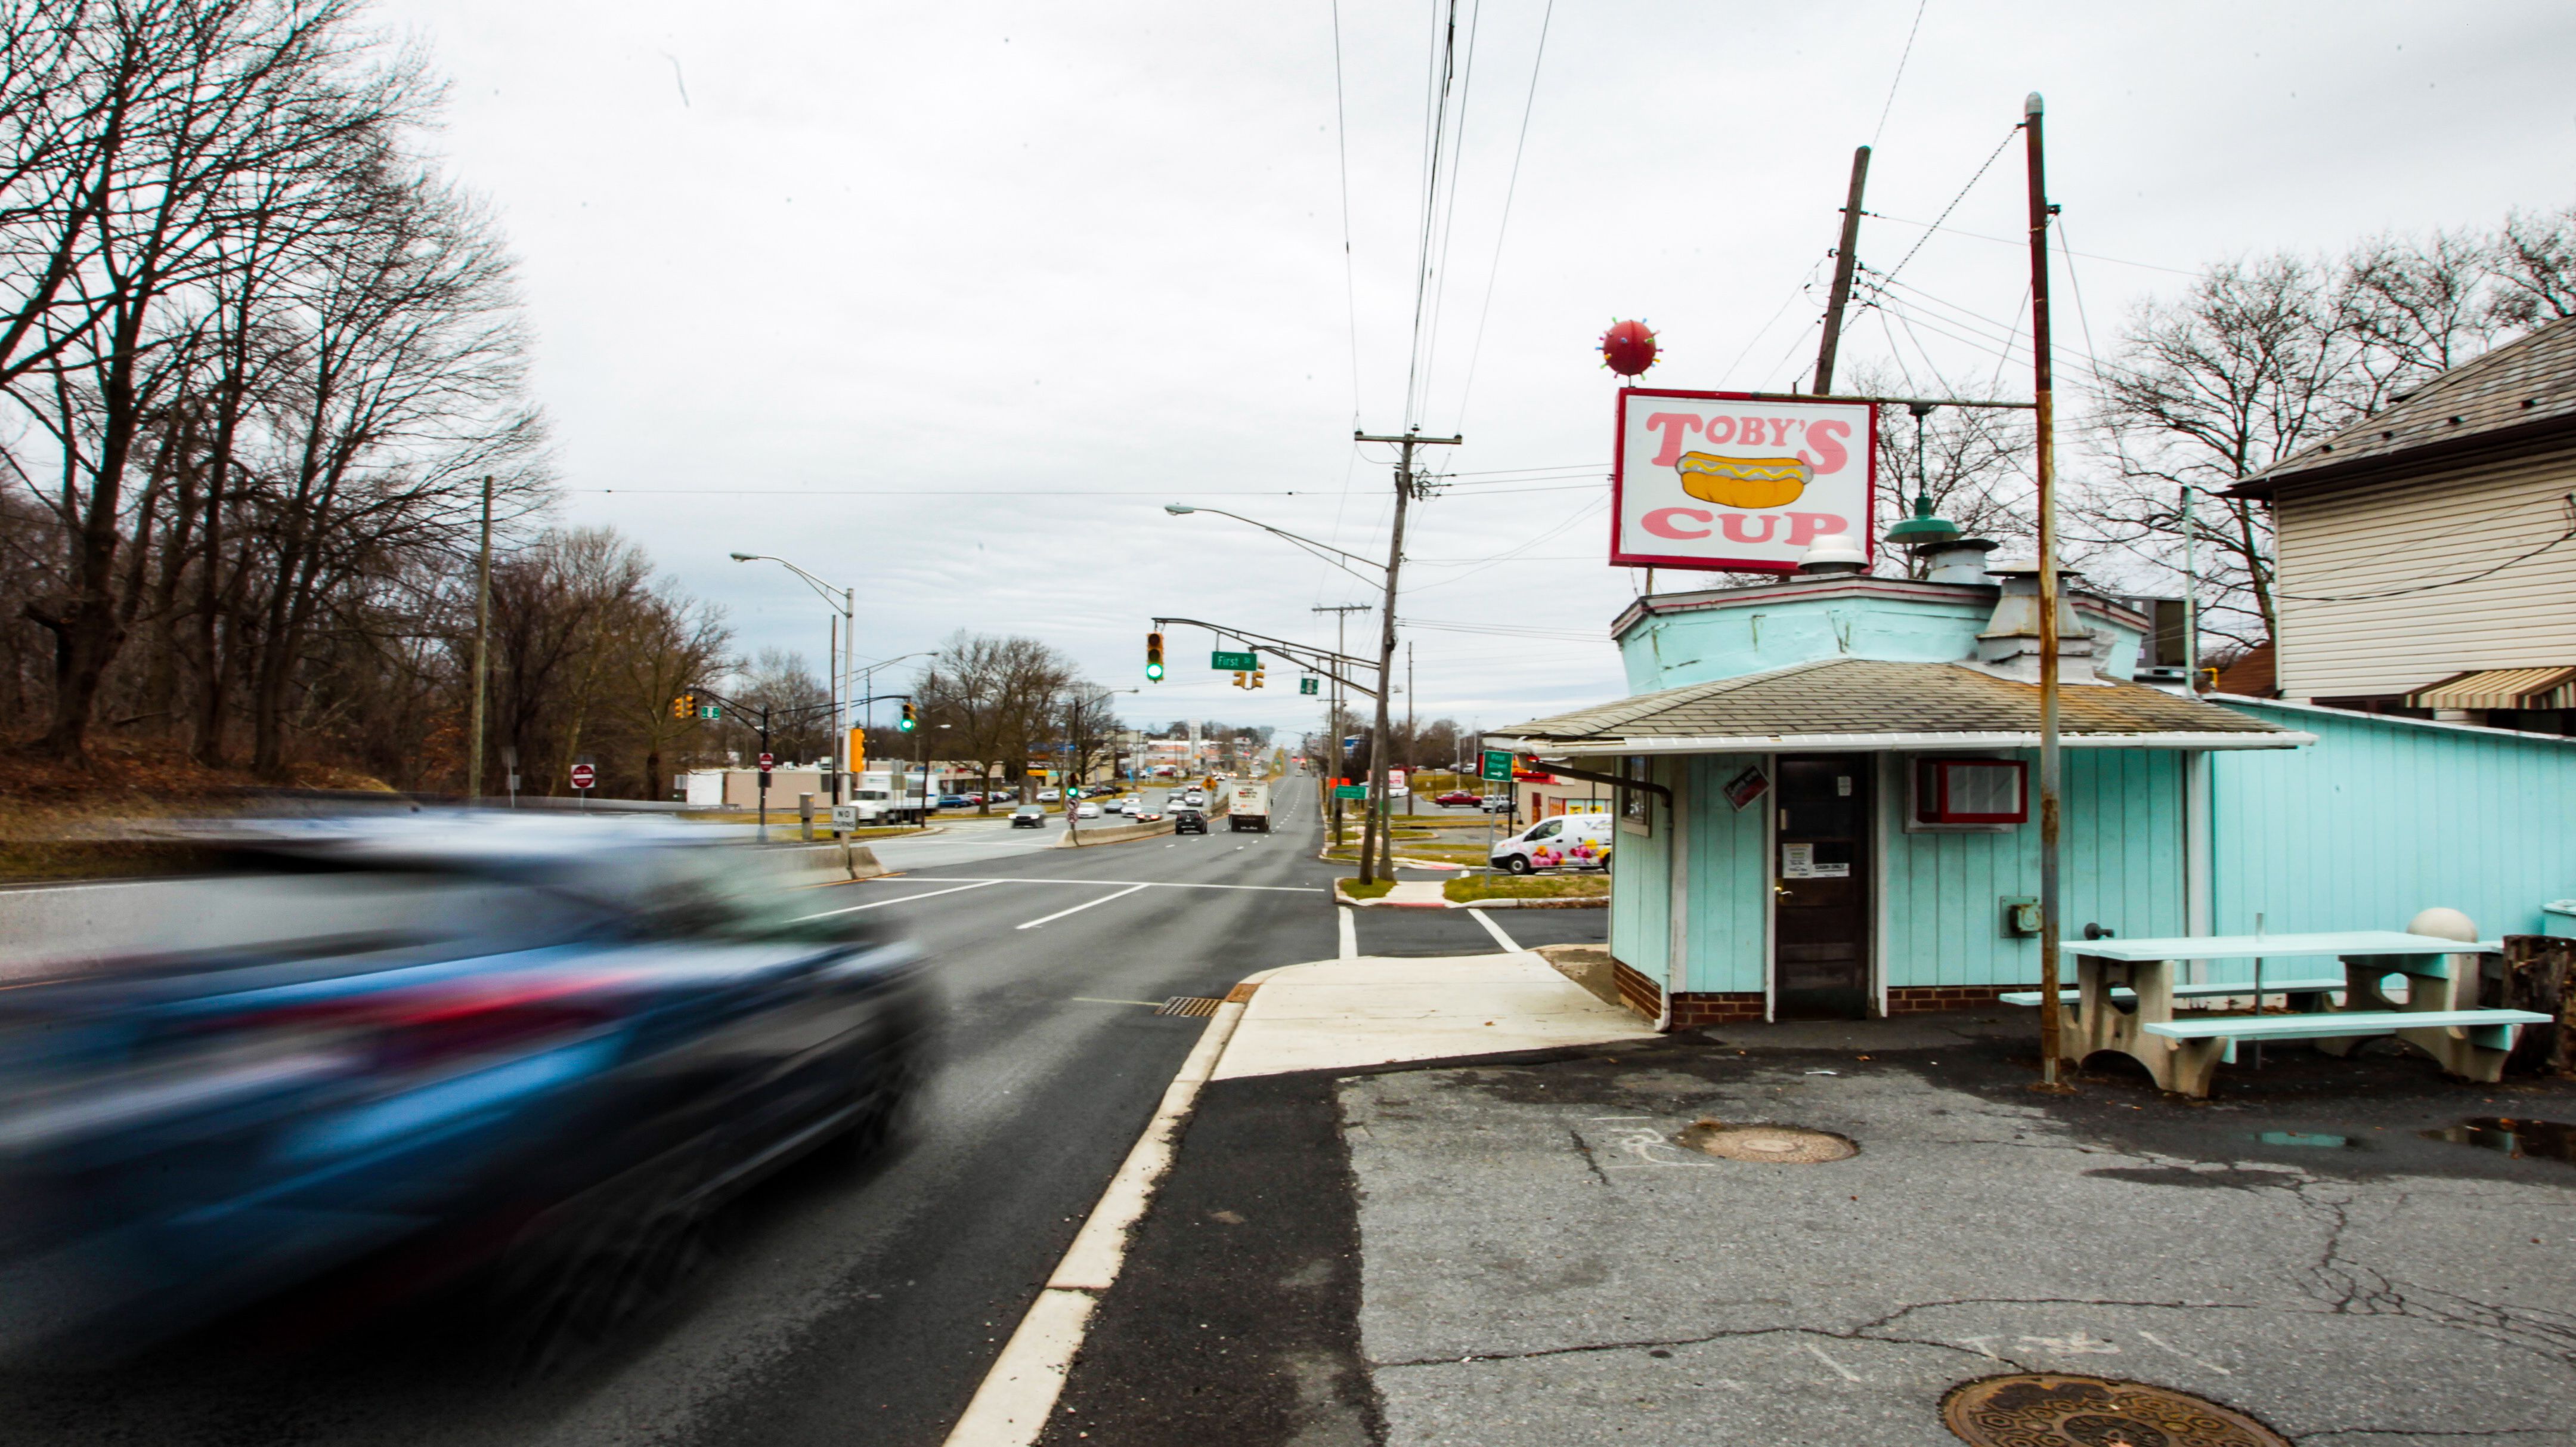 Grab a Bite of This Opportunity: Toby's Hot Dog Stand and Property Block in  Phillipsburg, NJ Officially Up for Sale